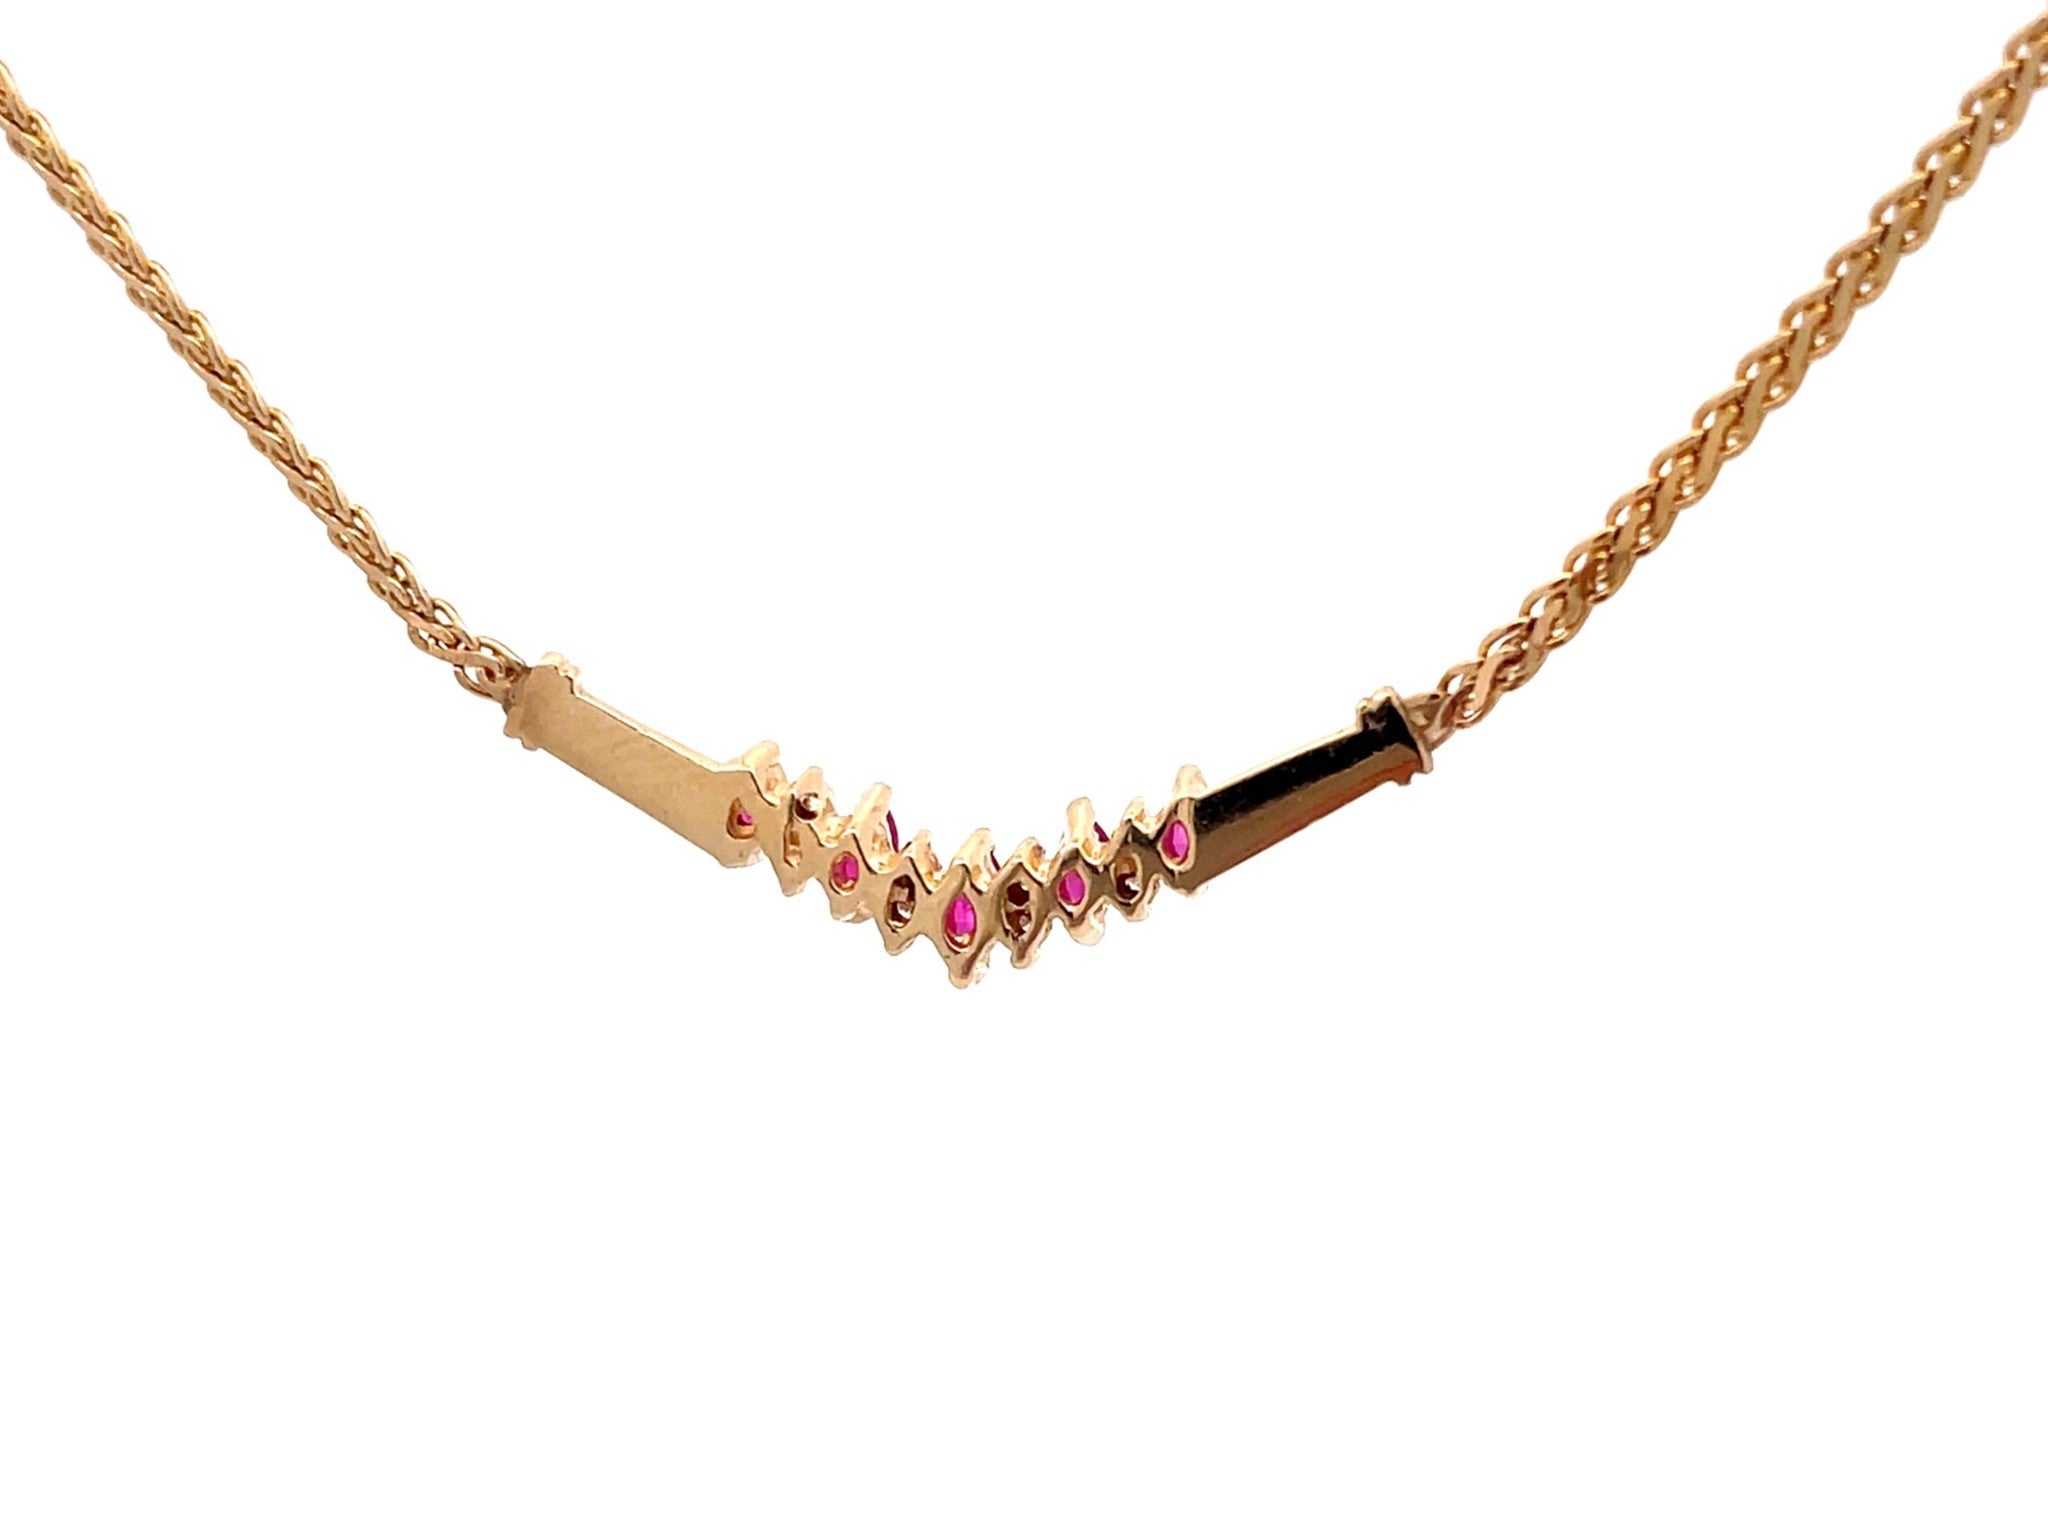 Marquise Ruby and Round Brilliant Diamond Necklace in 14k Yellow Gold